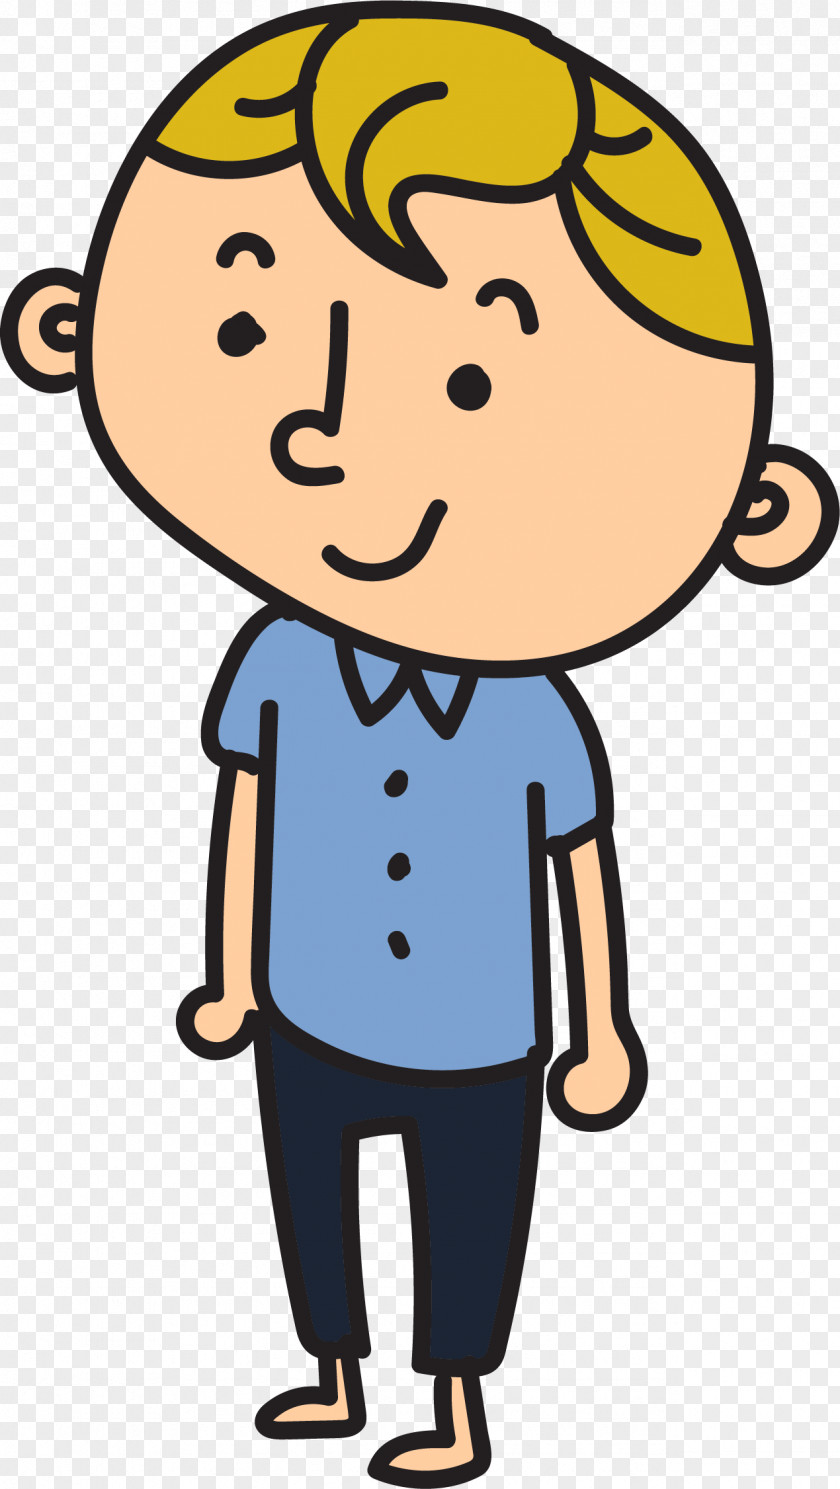 Go To School The Little Boy Animation Child PNG